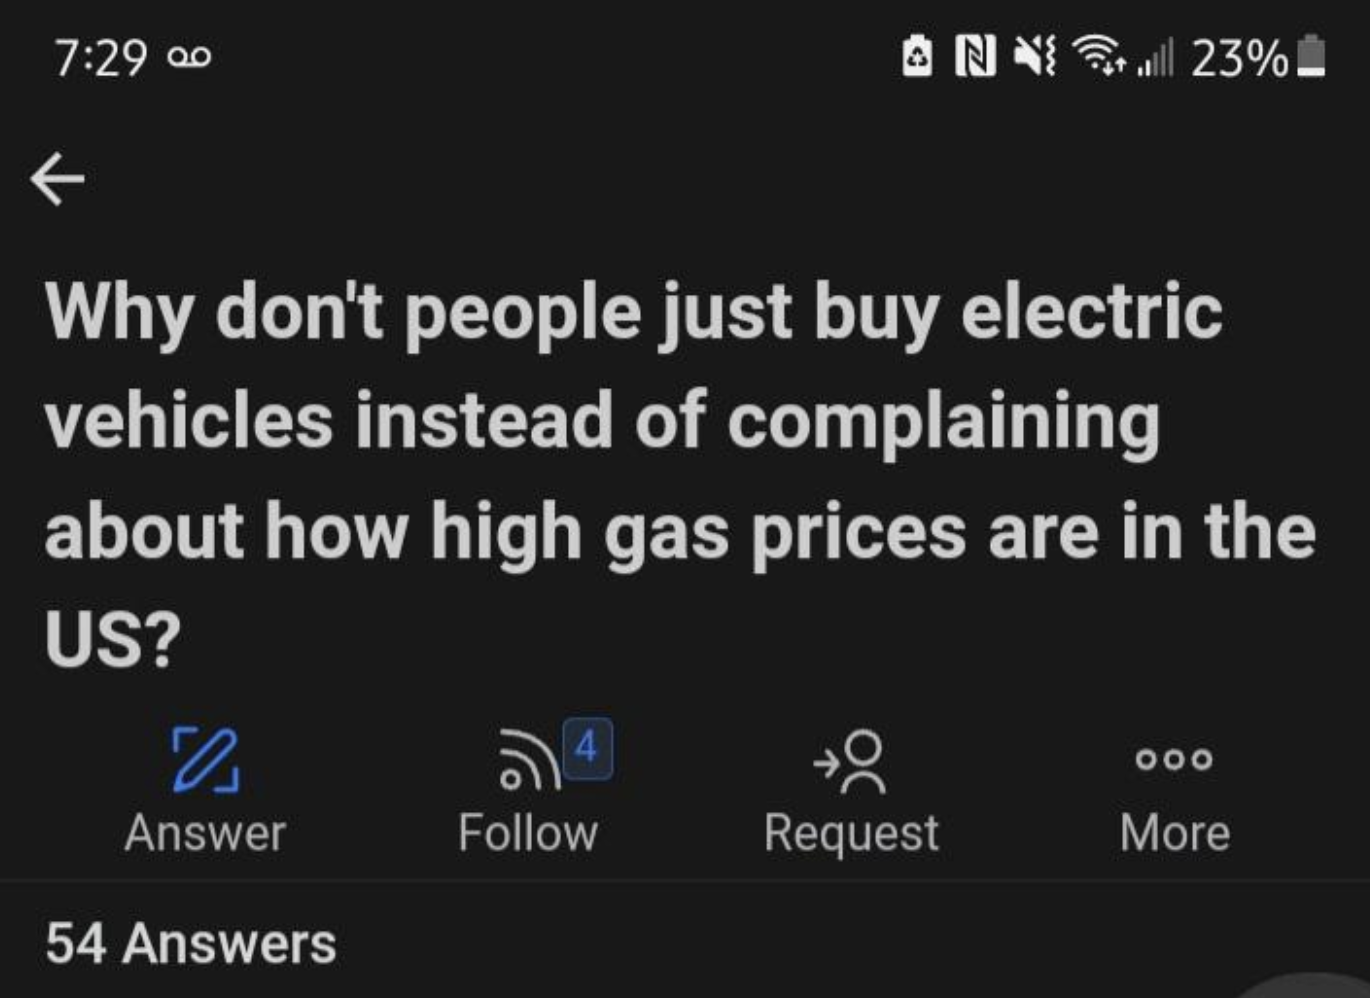 screenshot - N23% Nil 23% Why don't people just buy electric vehicles instead of complaining about how high gas prices are in the Us? 0 Answer 54 Answers 54 000 Request More